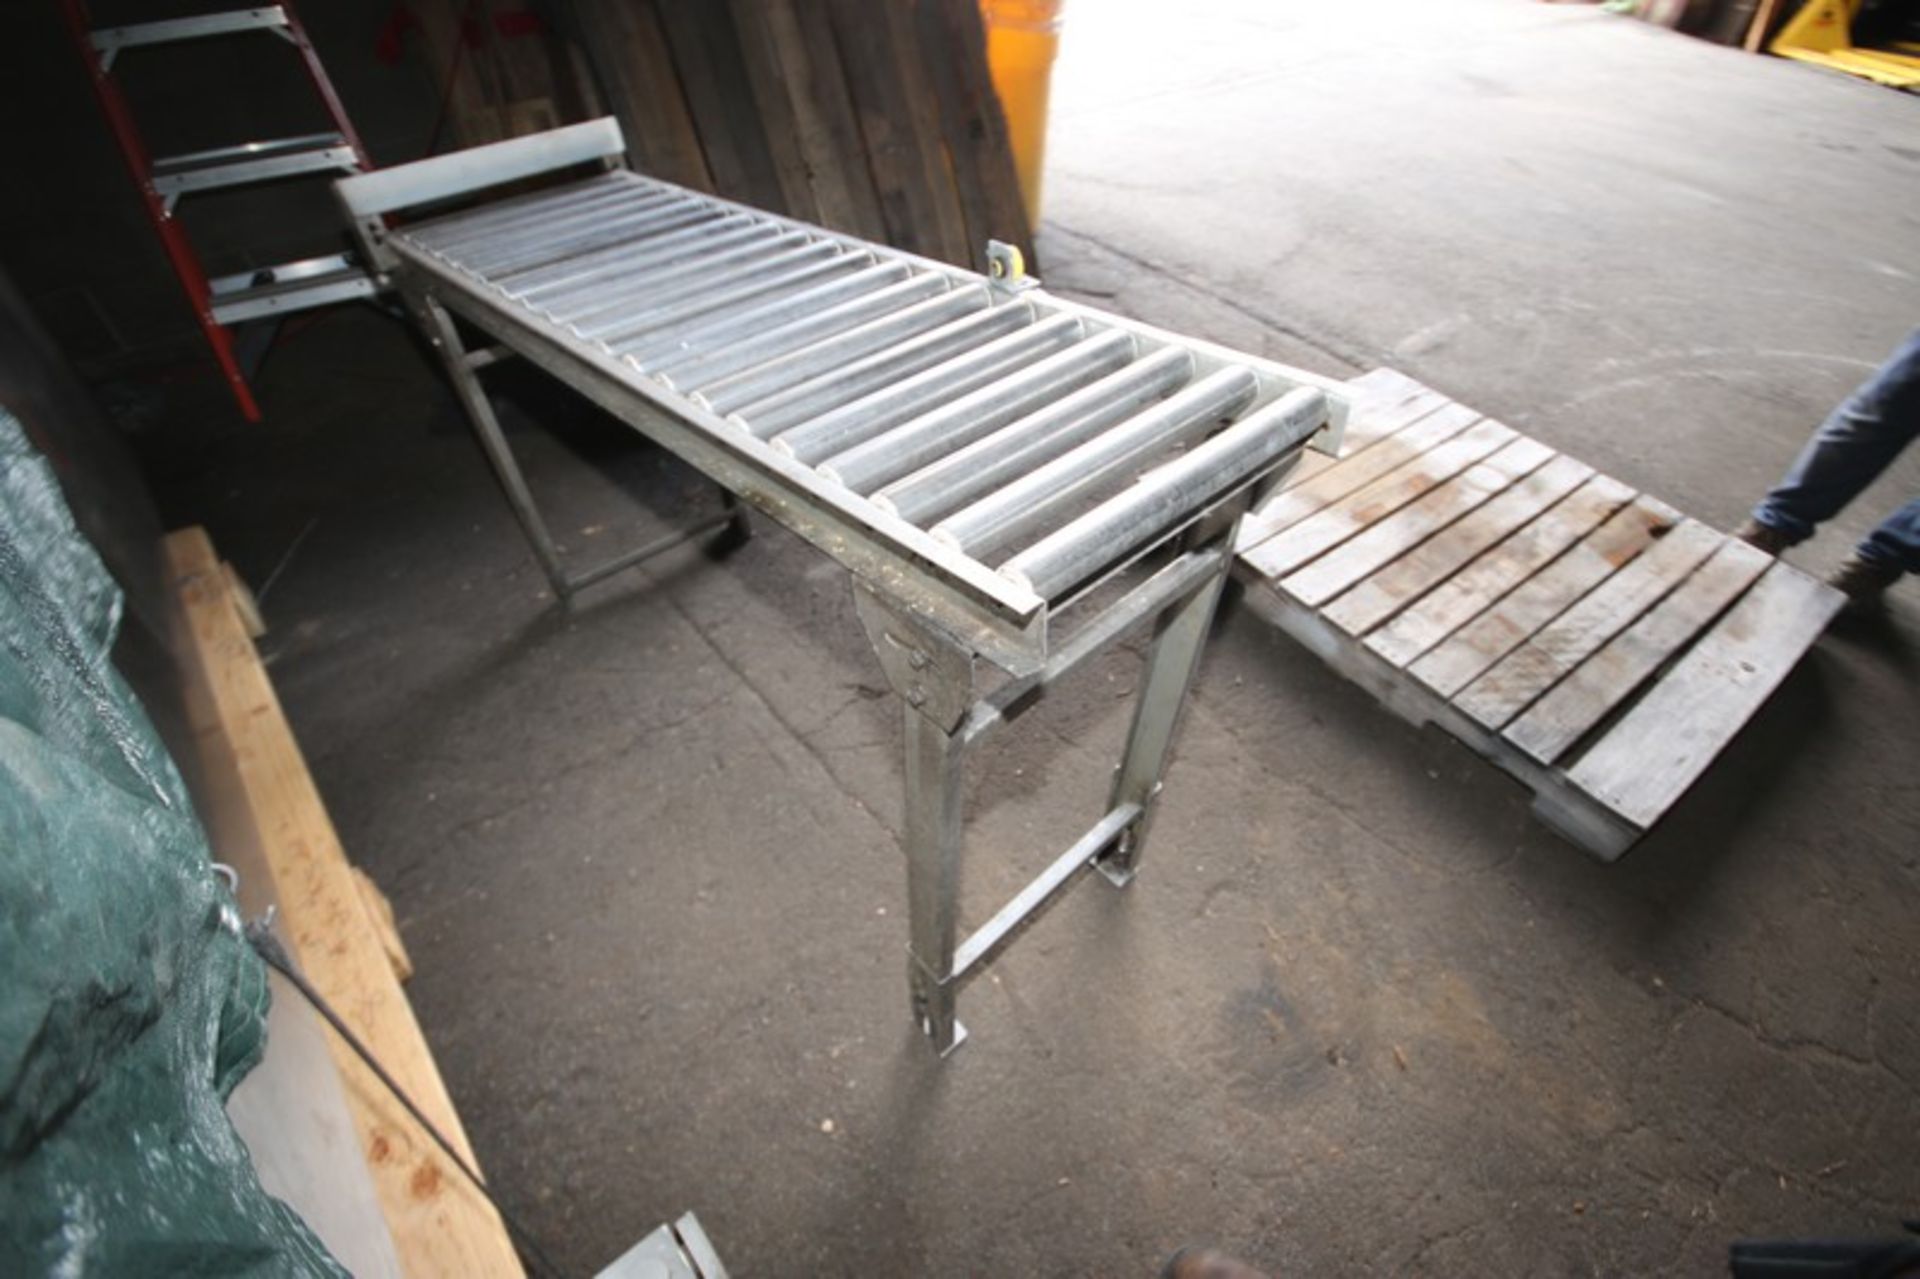 Skate Conveyor Section,Overall Dims.: Aprox. 5' L x 16" W x 33" H (INV#78054)(Located @ the MDG